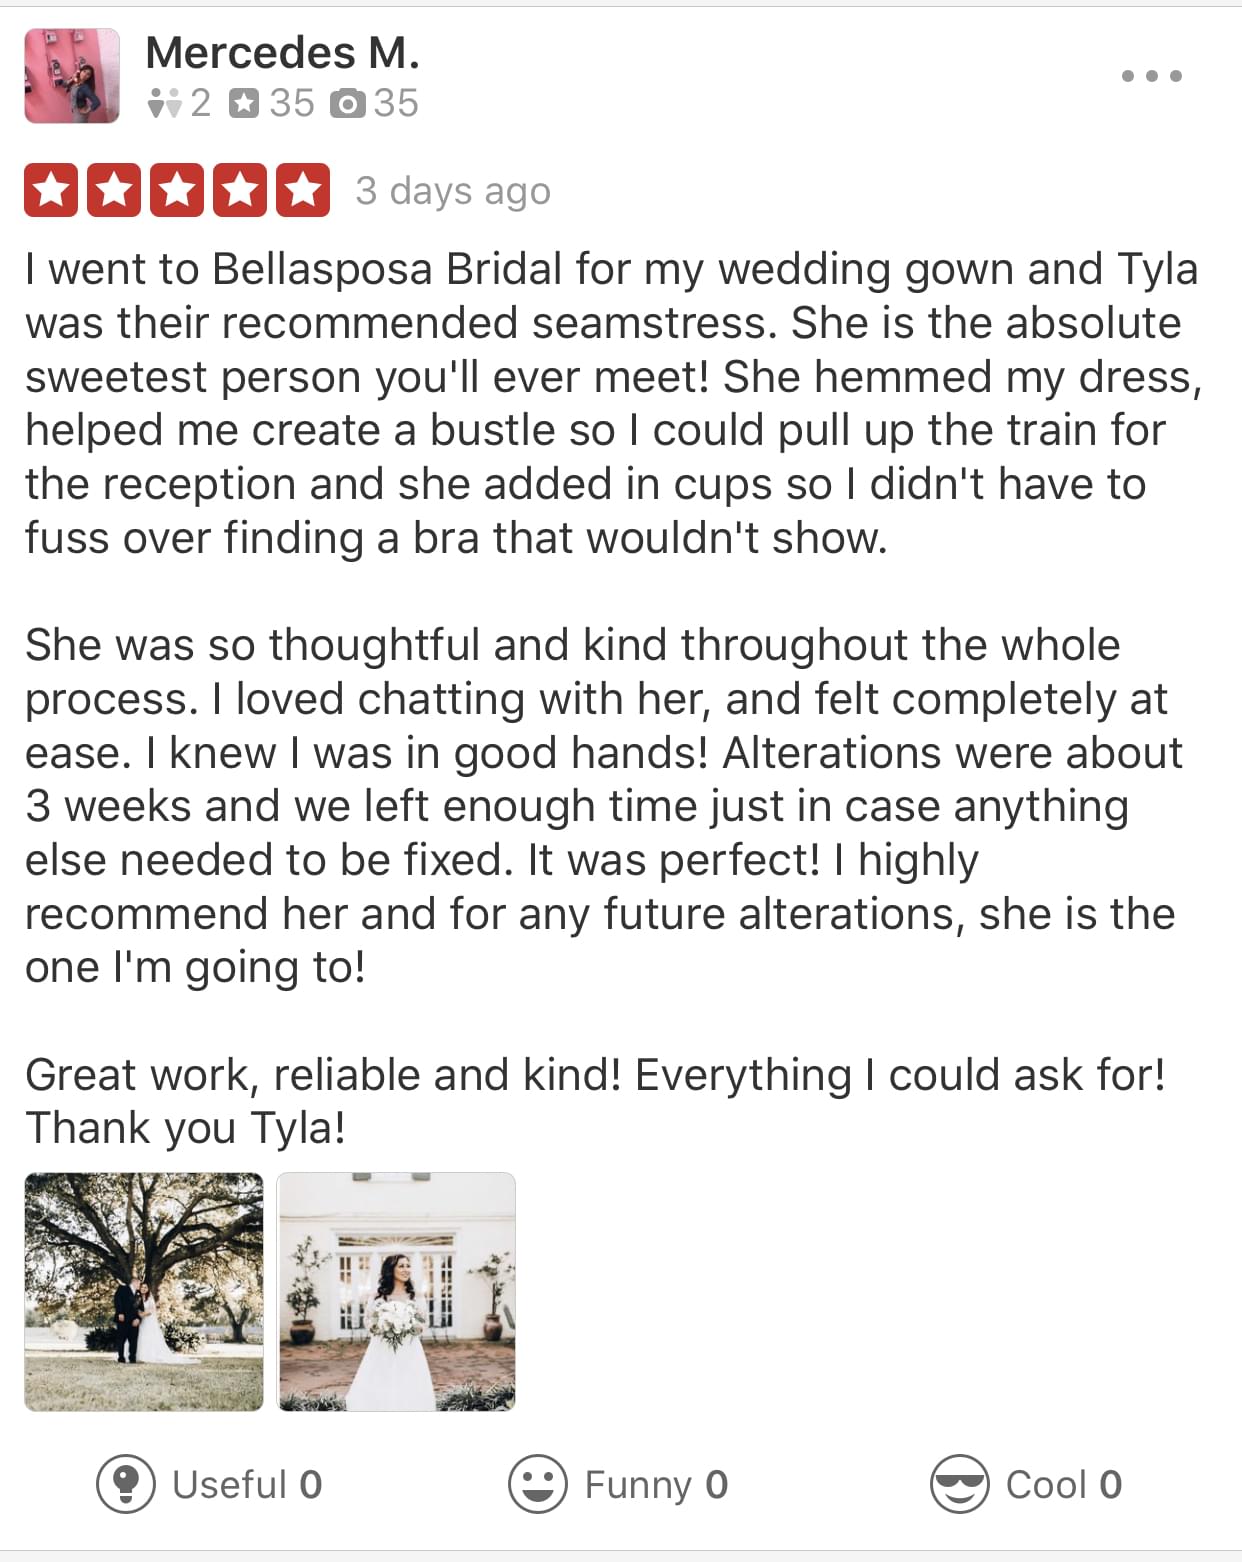 Mercedes left a review for tyla's bride, and how she got her dress from bellasposa bridal and got her wedding dress alteration with tyla's bride. She was very happy with the results.